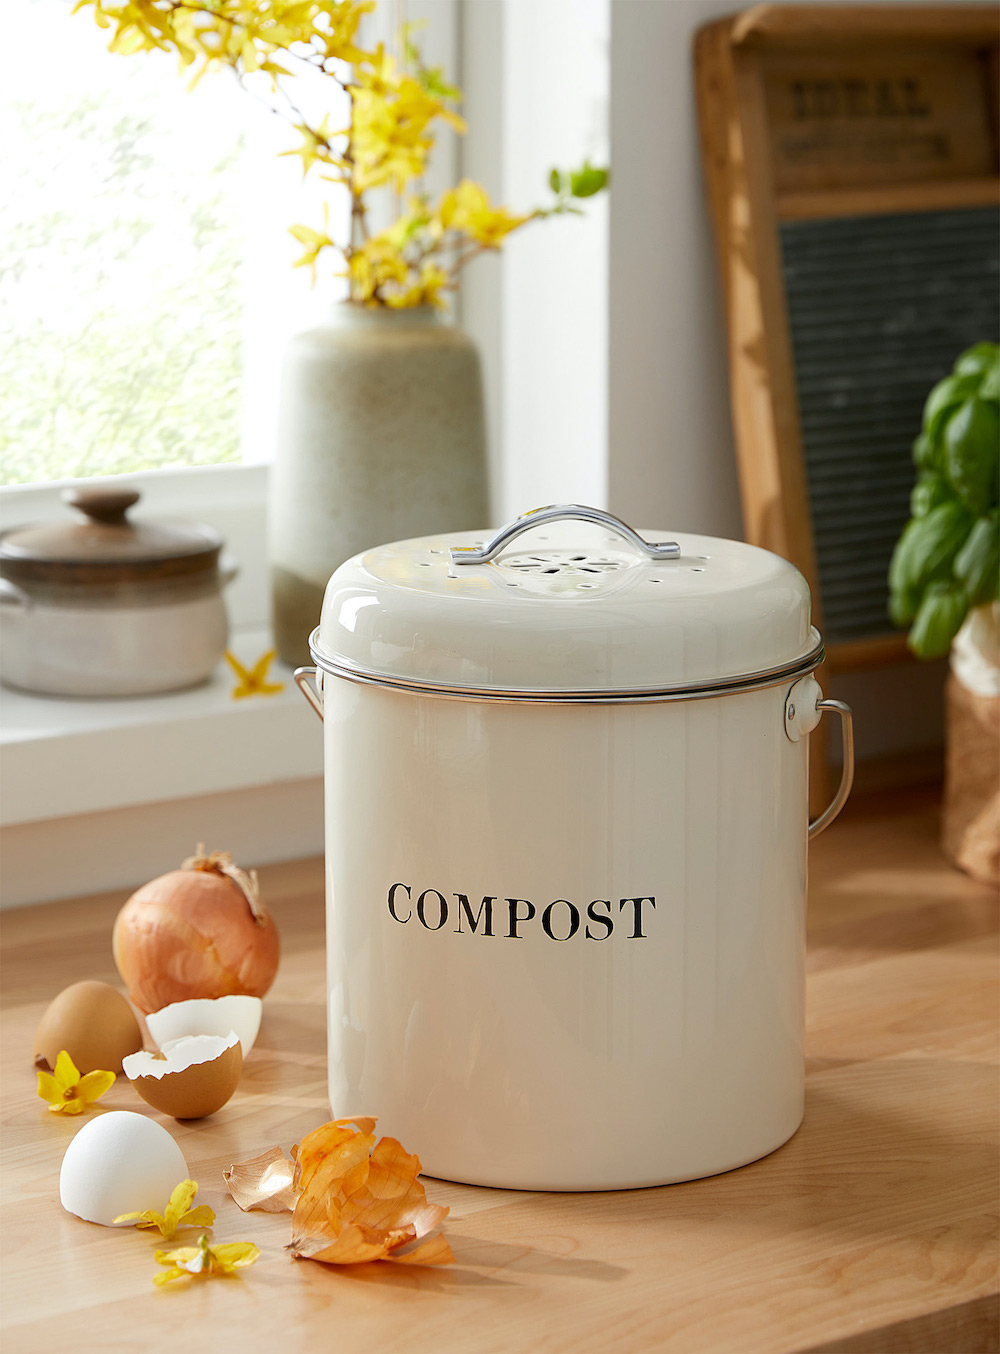 A chic, eco-friendly white enameled compost bin with ‘COMPOST’ written on it sitting on a wood countertop surrounded by food scraps